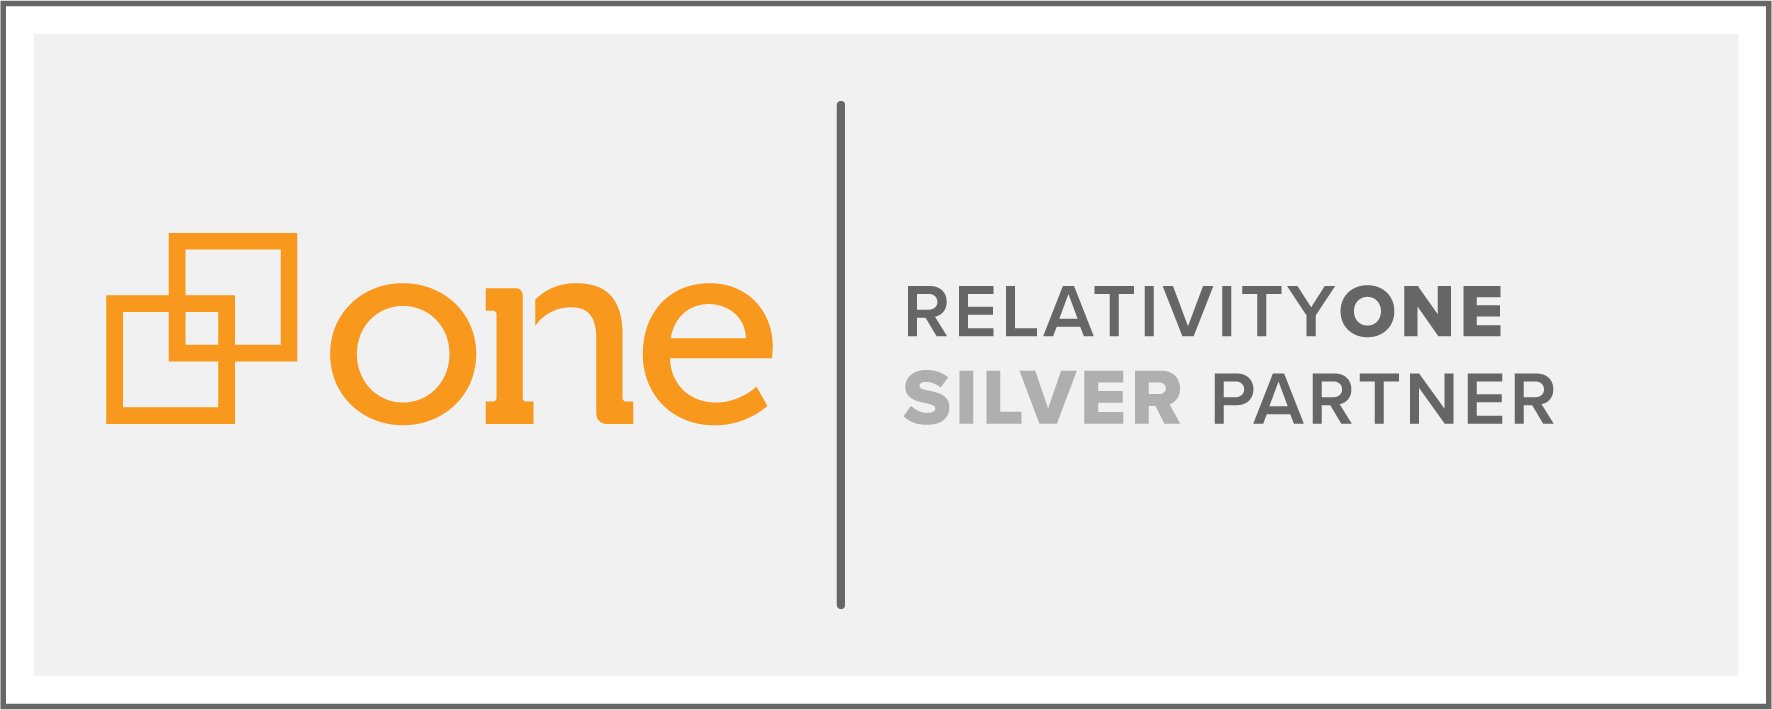 rel-one-silver-partner-rgb